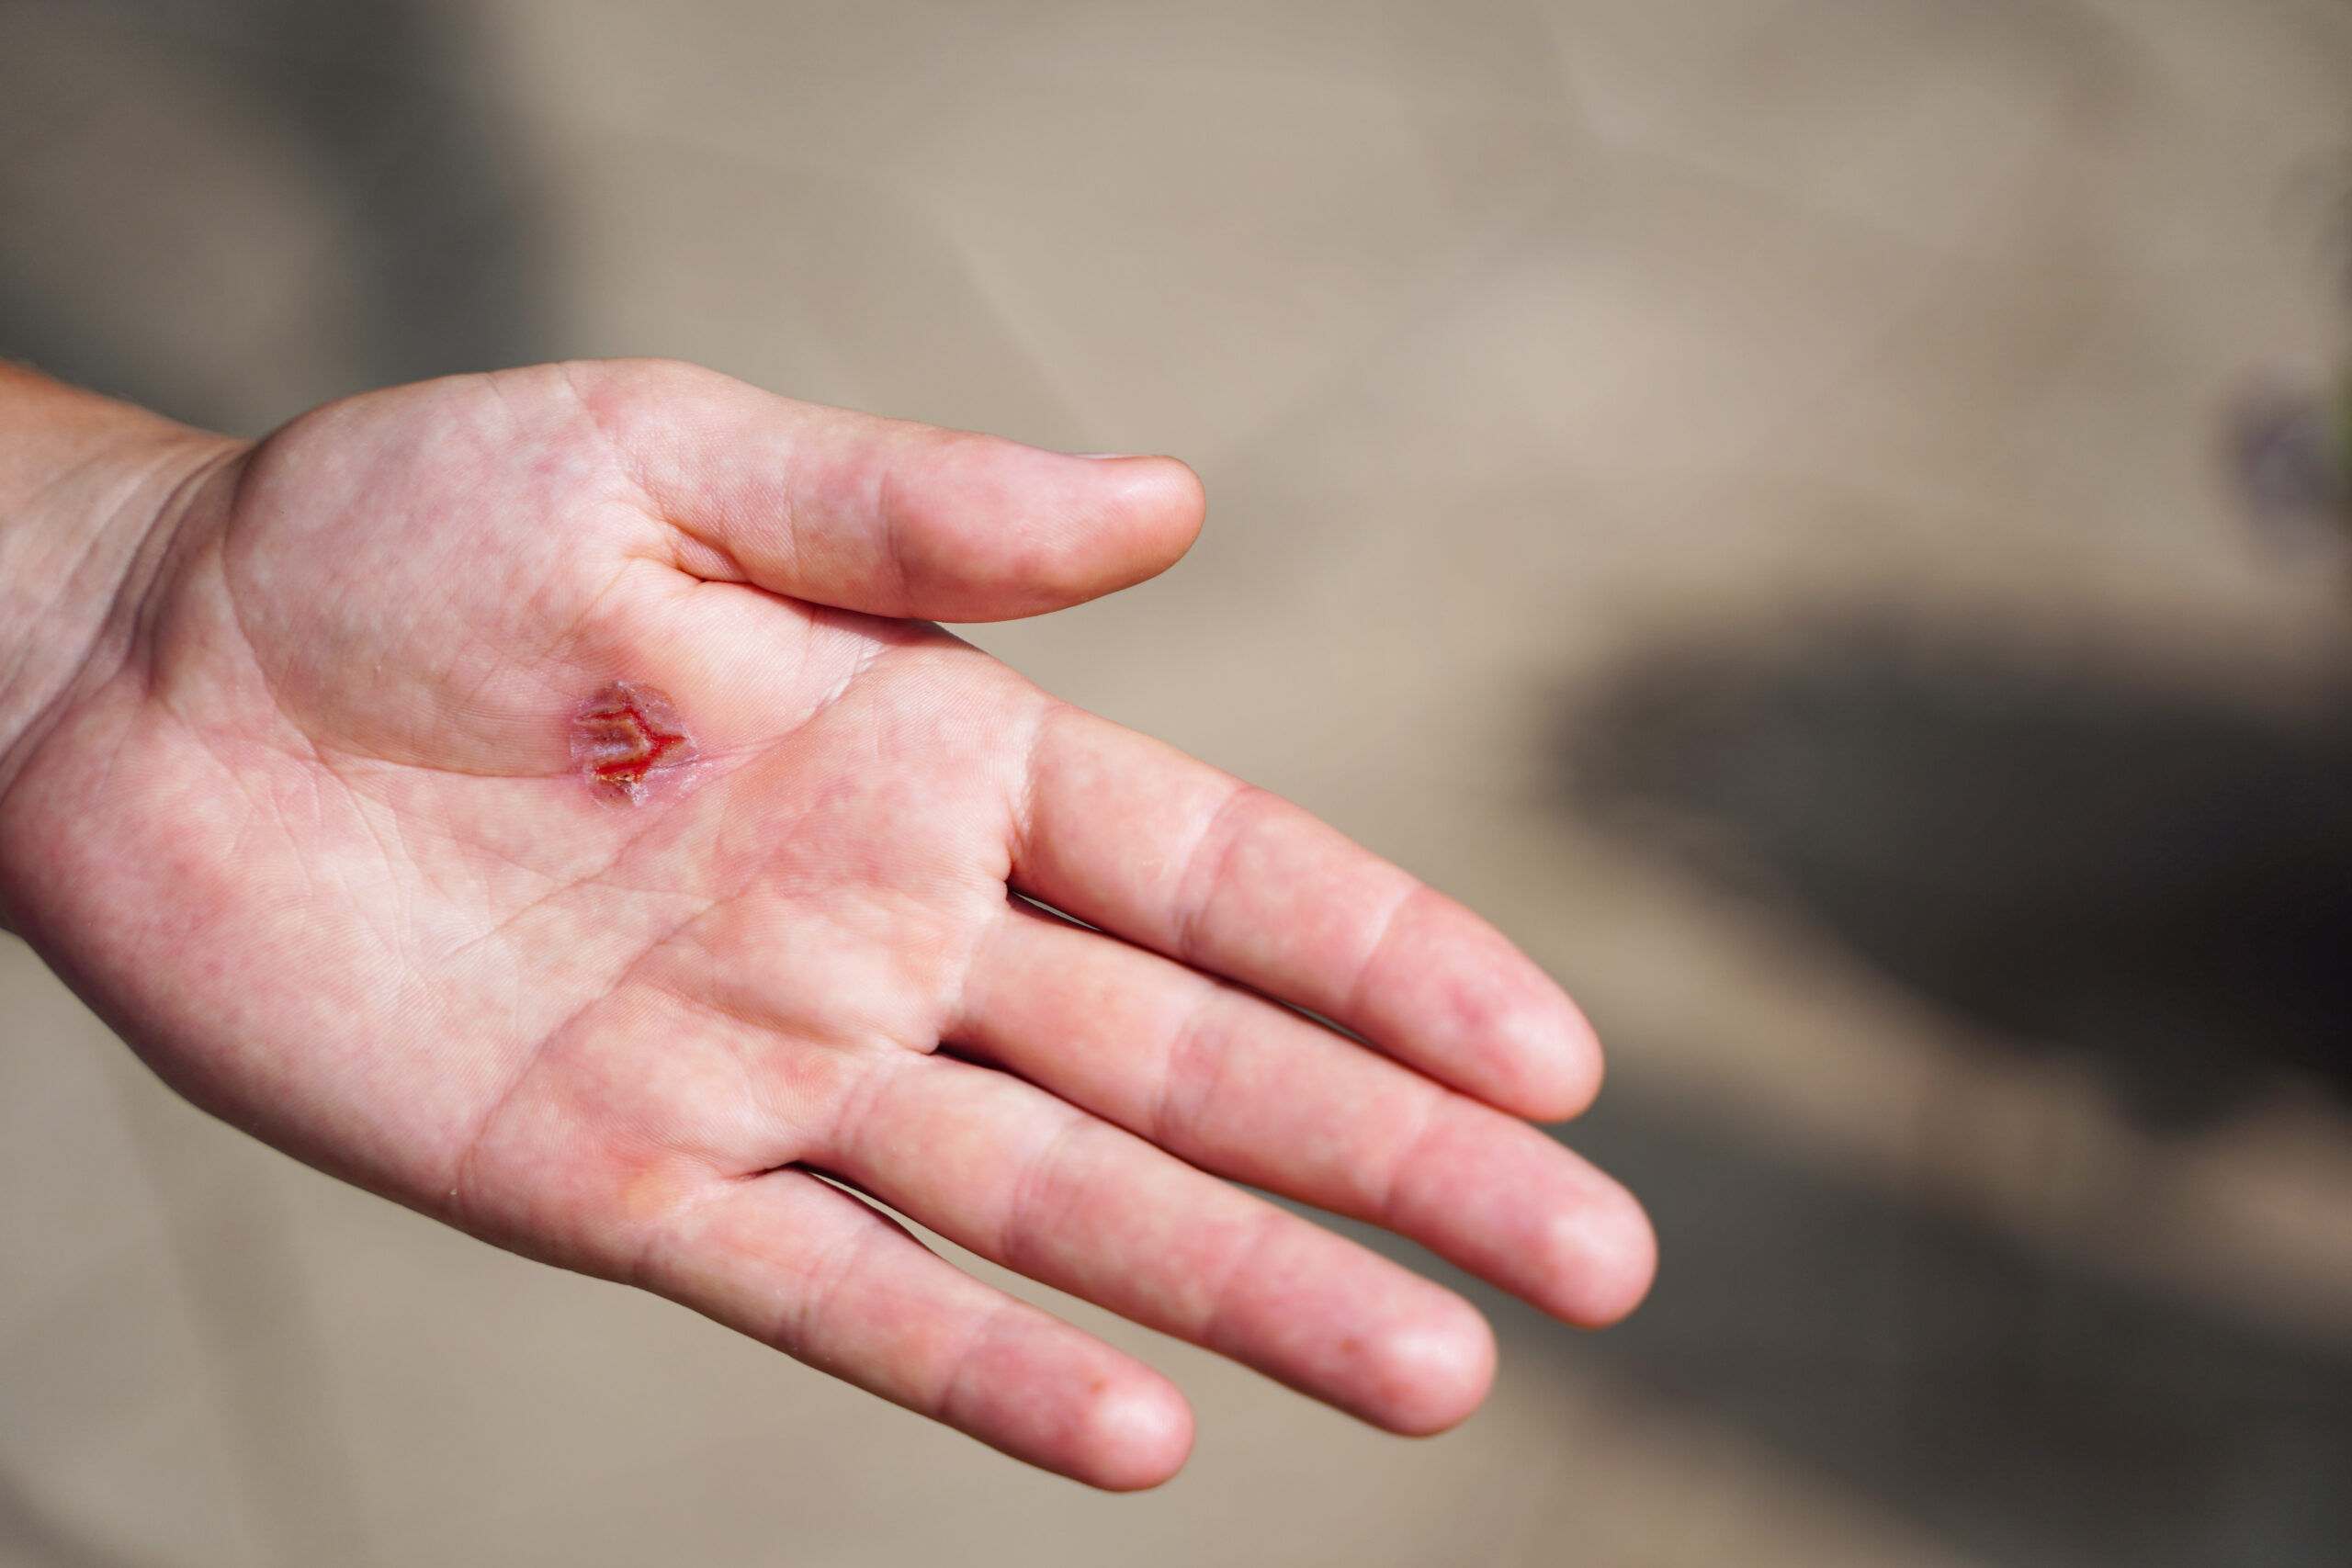 How to bandage skin injuries on the palm of your hand